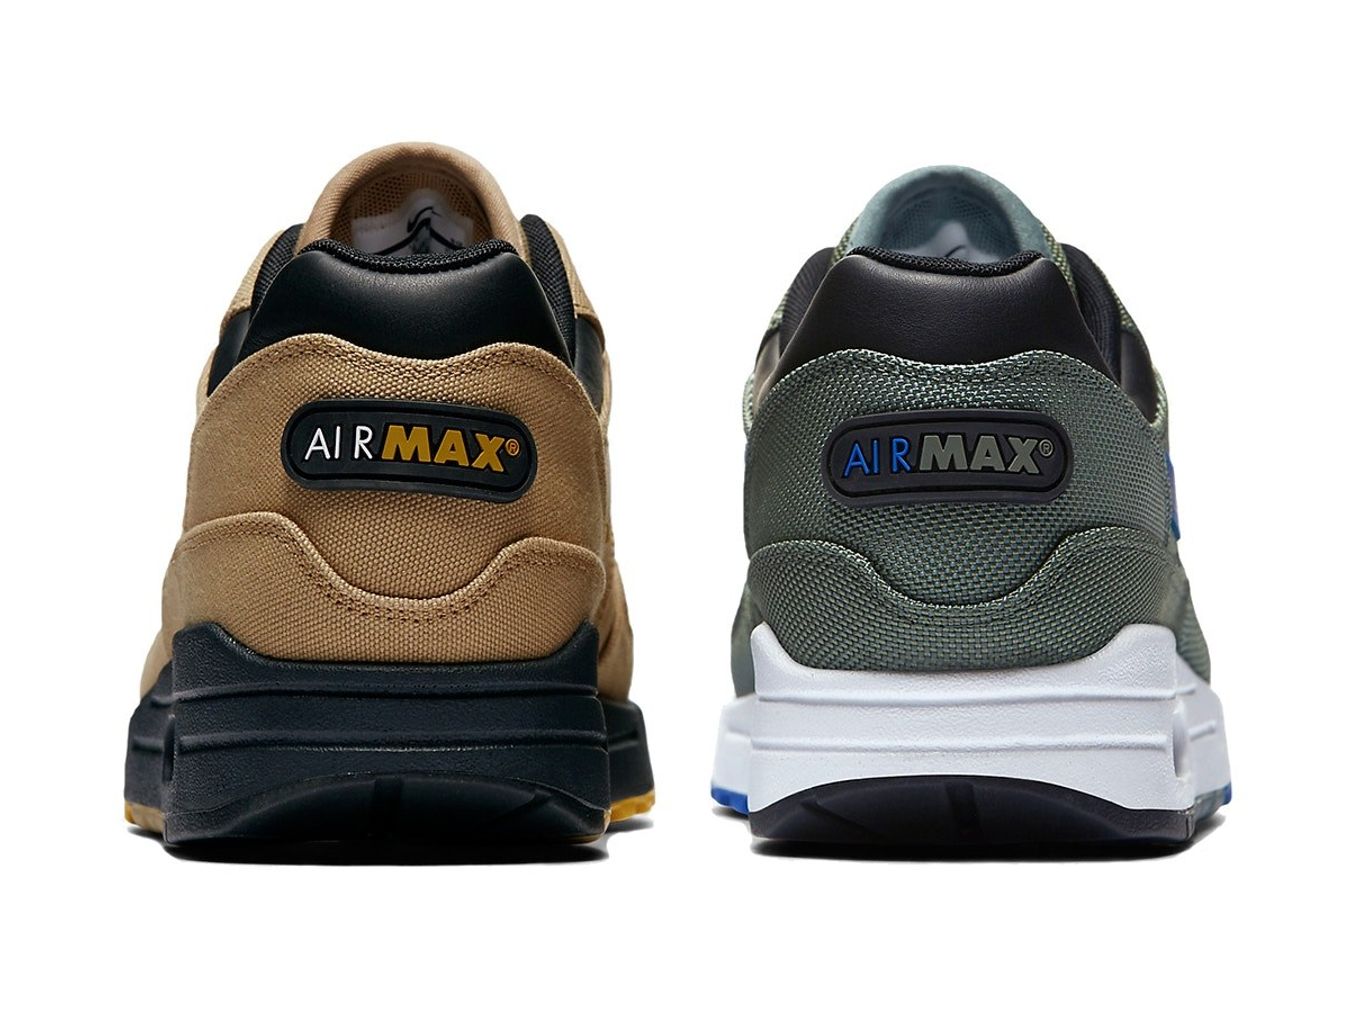 Air Max channel Air Max 93 for some reason? - Sneaker Freaker